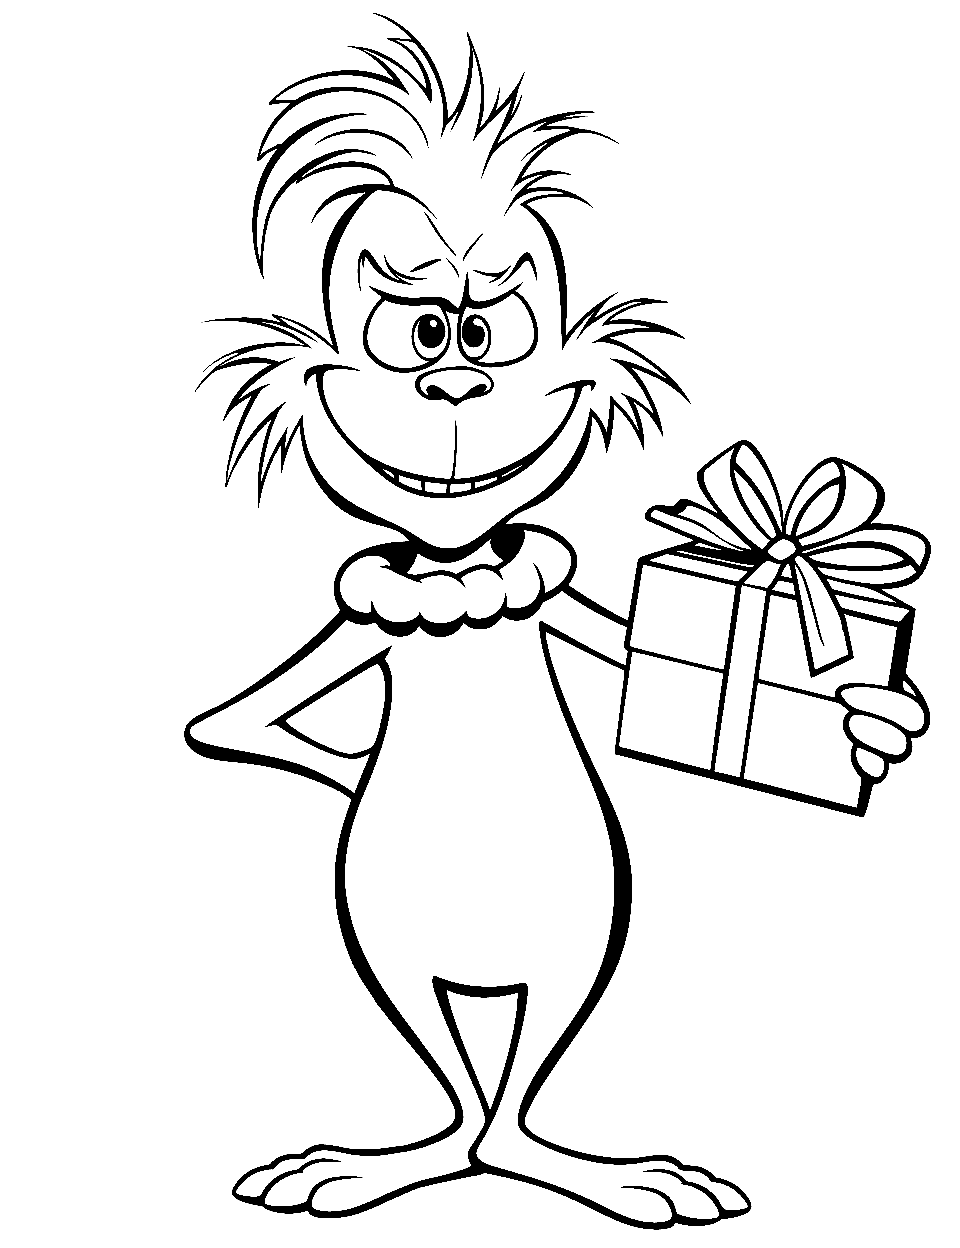 Grinch’s Christmas Gift Coloring Page - The Grinch is holding a wrapped gift with a bow on top.